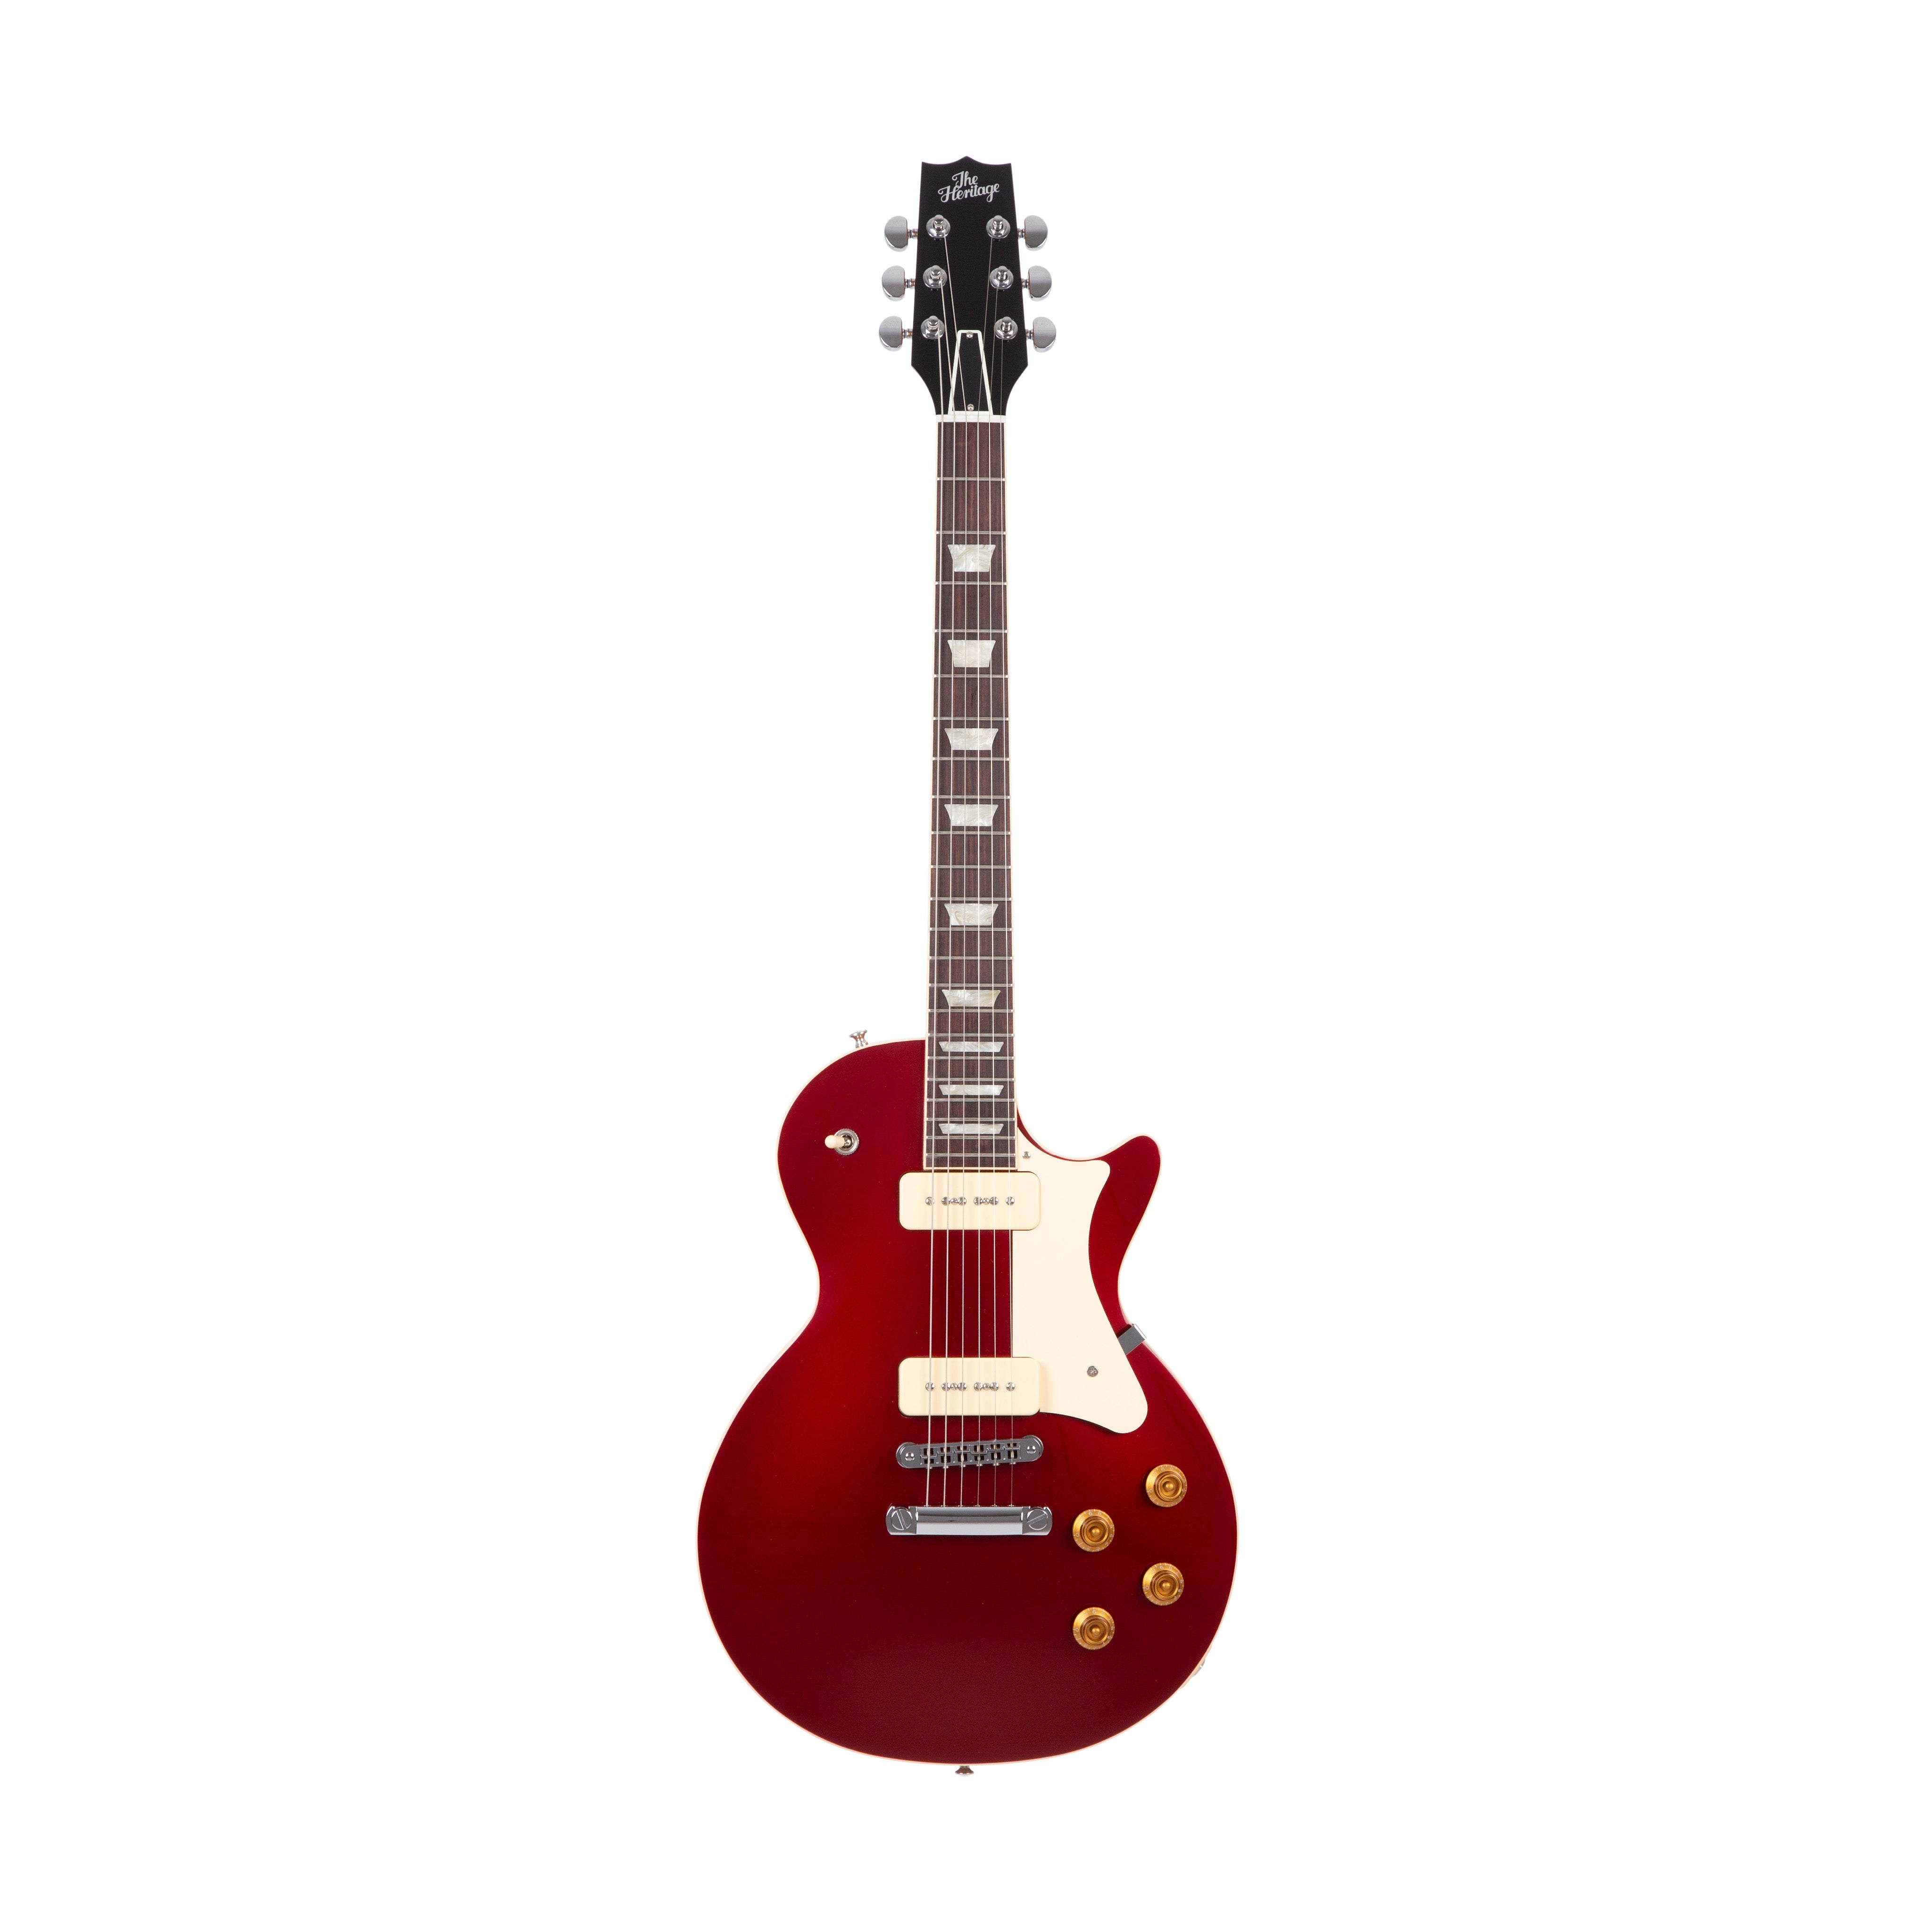 Heritage Standard Collection H-150 P90 Electric Guitar with Case, Cherry